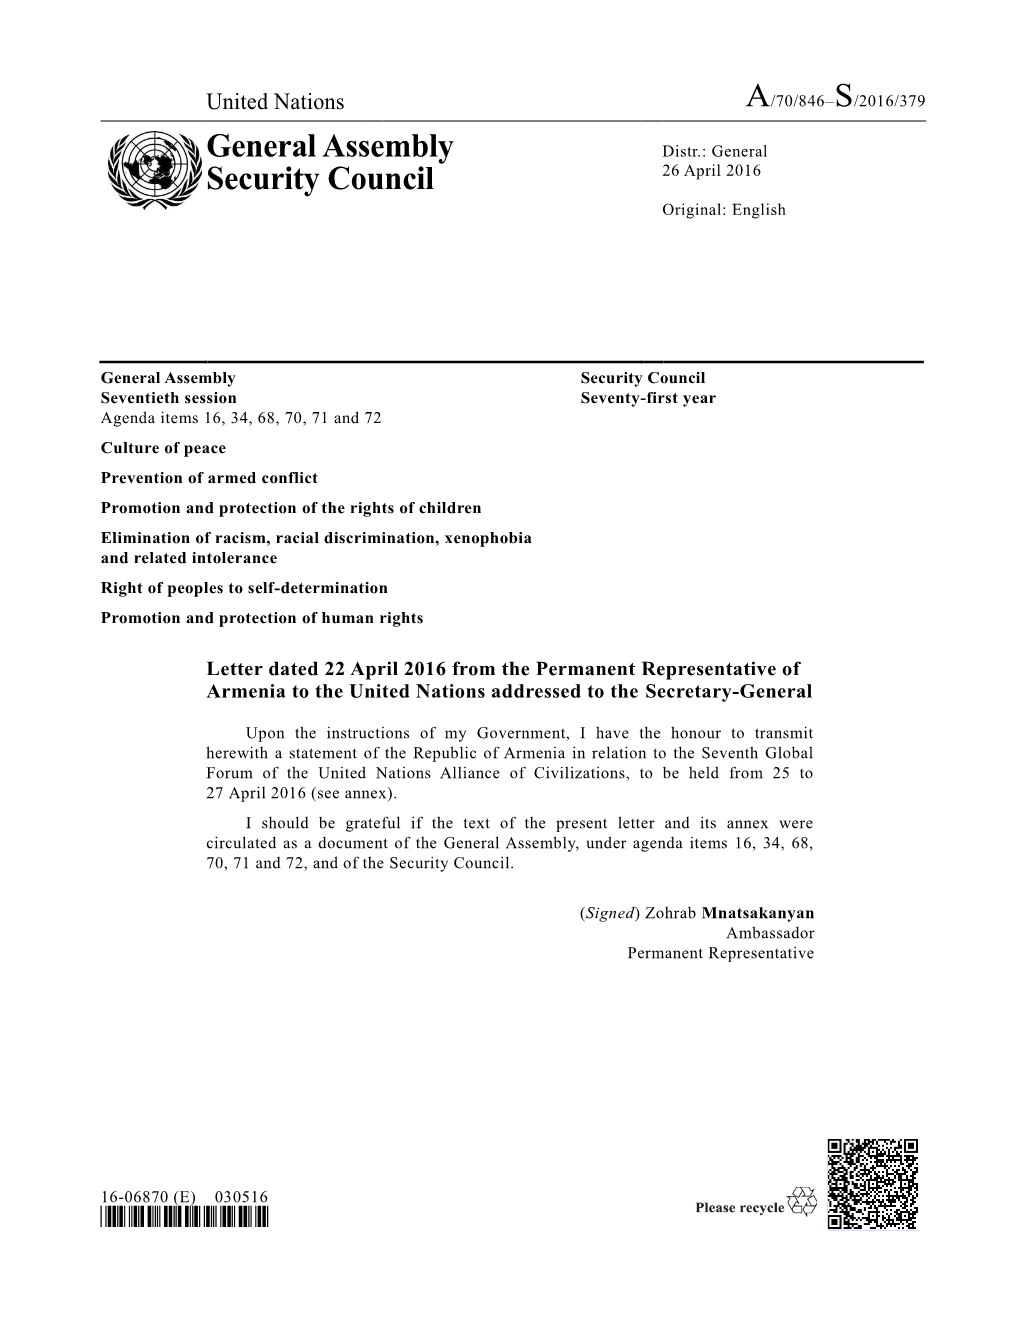 General Assembly Security Council Seventieth Session Seventy-First Year Agenda Items 16, 34, 68, 70, 71 and 72